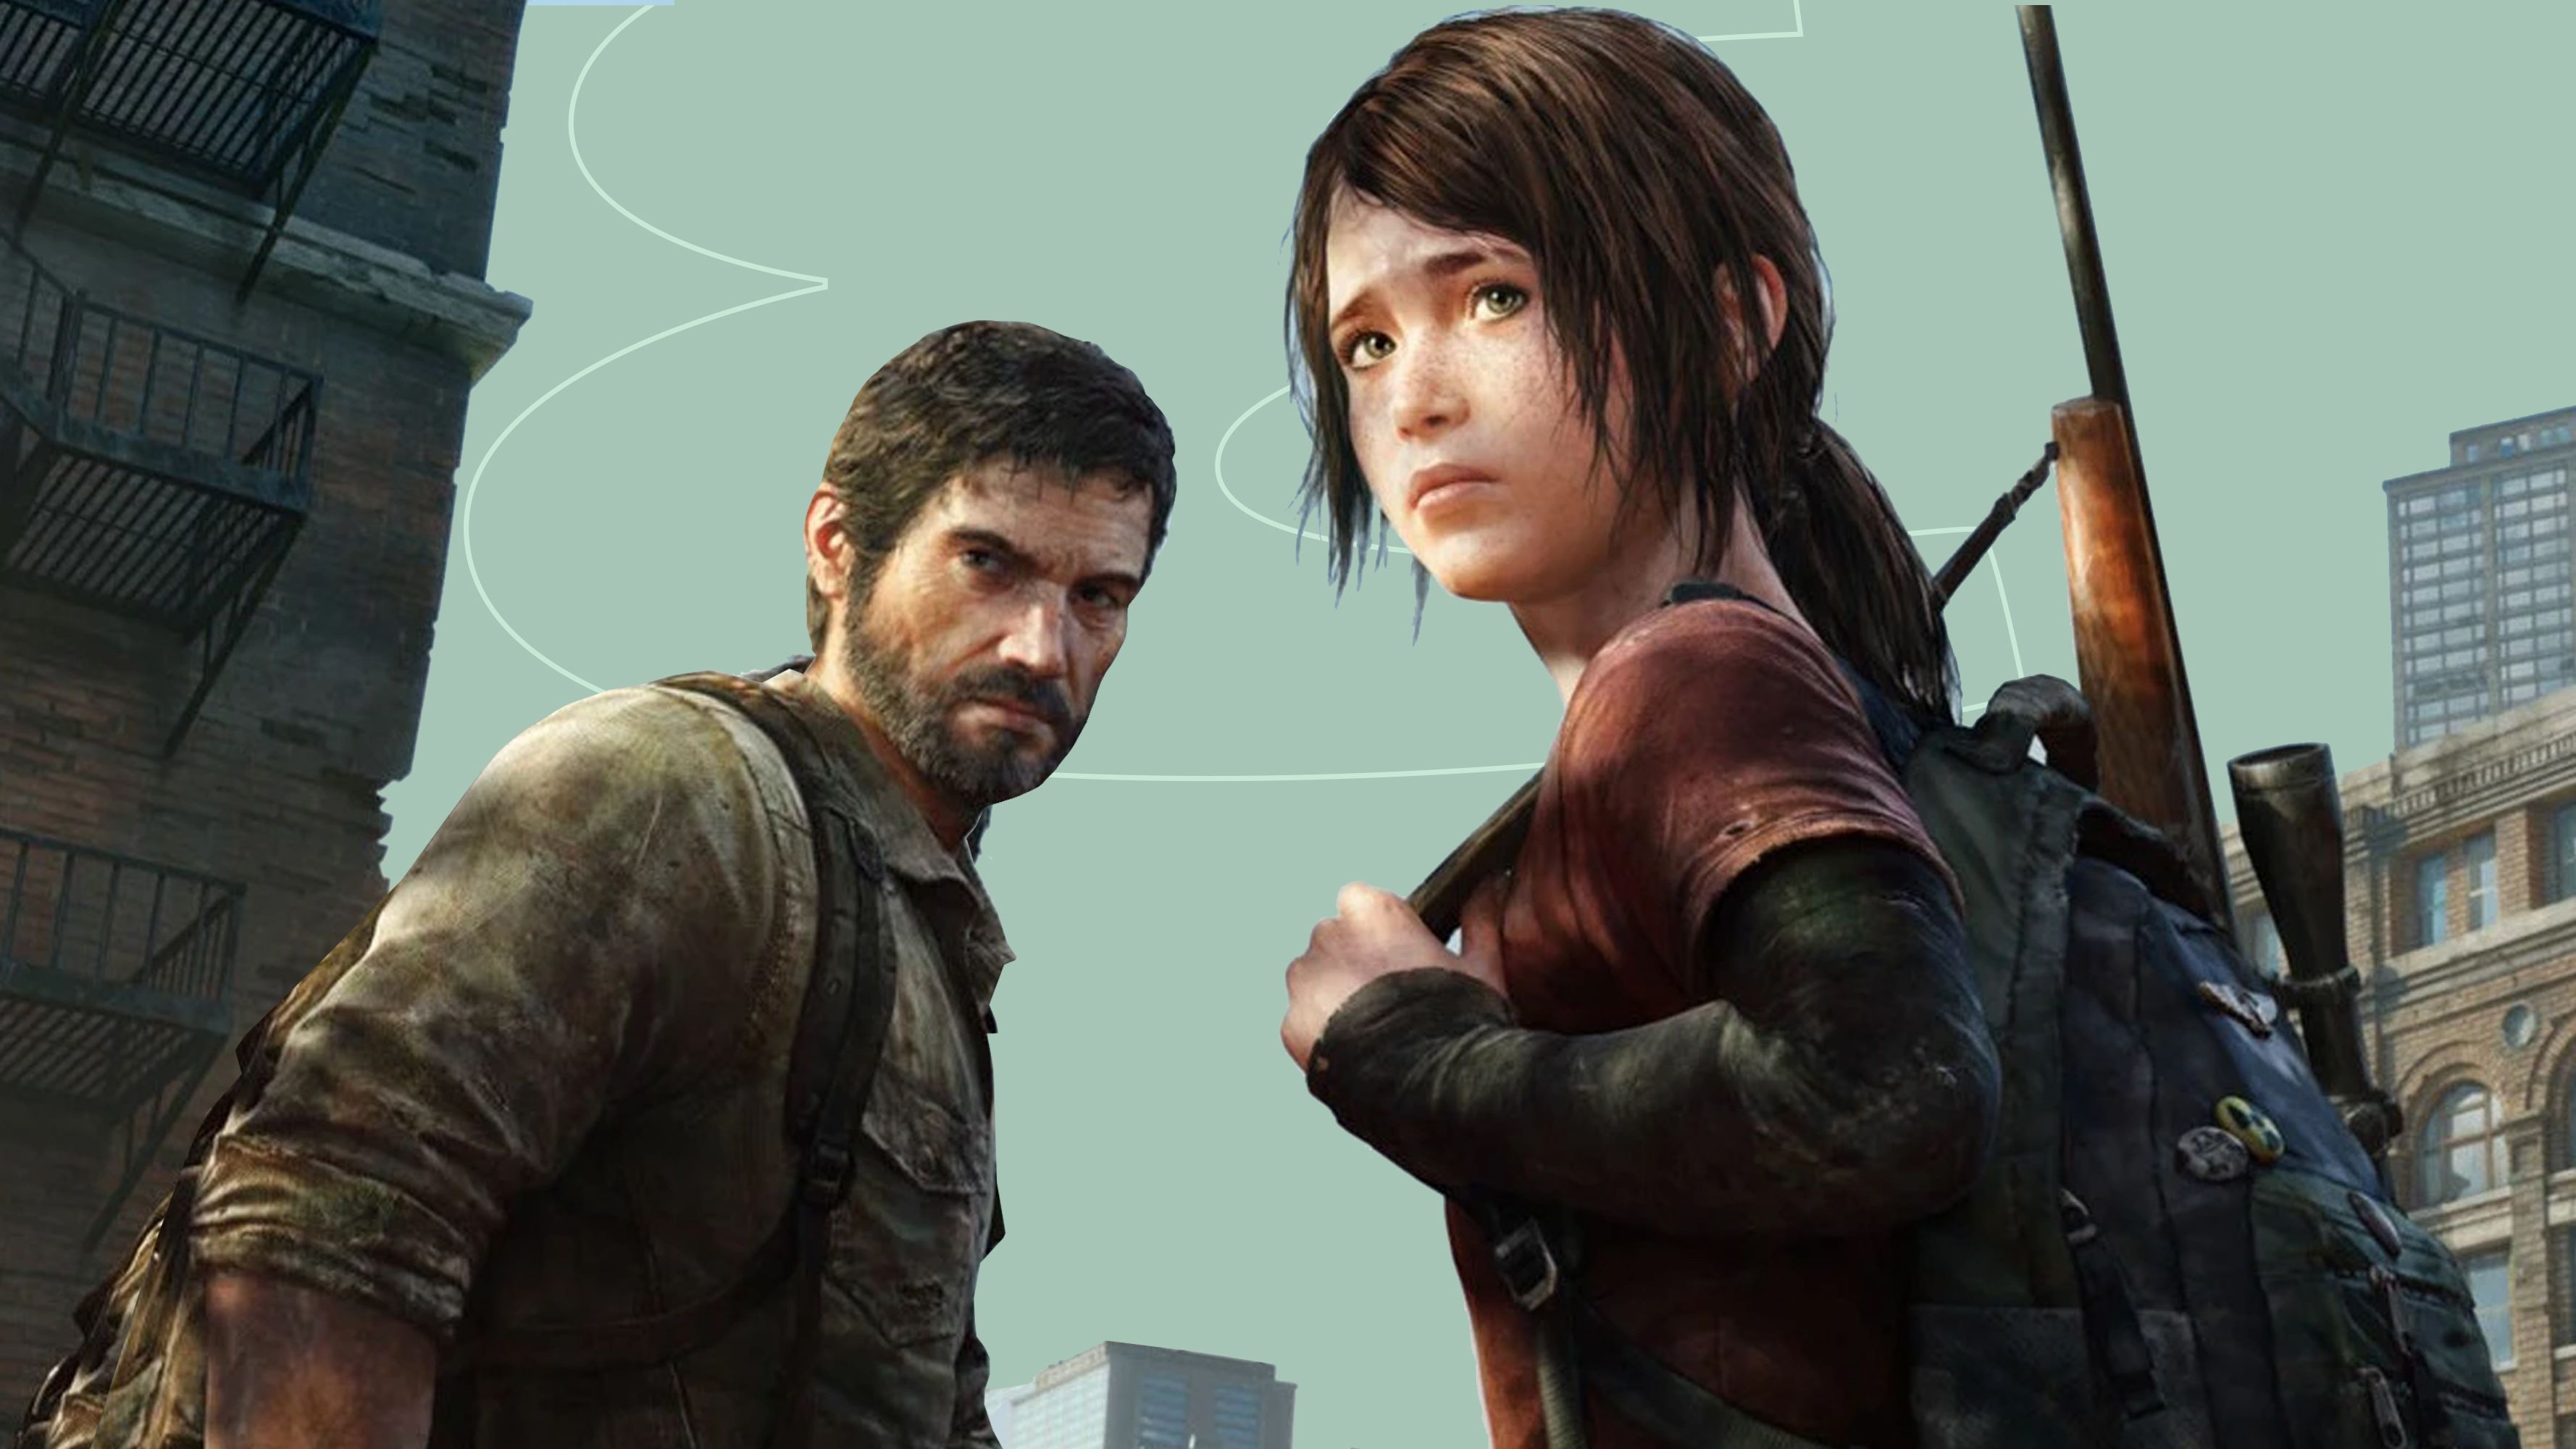 The Last of Us Part 1 PC Release Date Announced